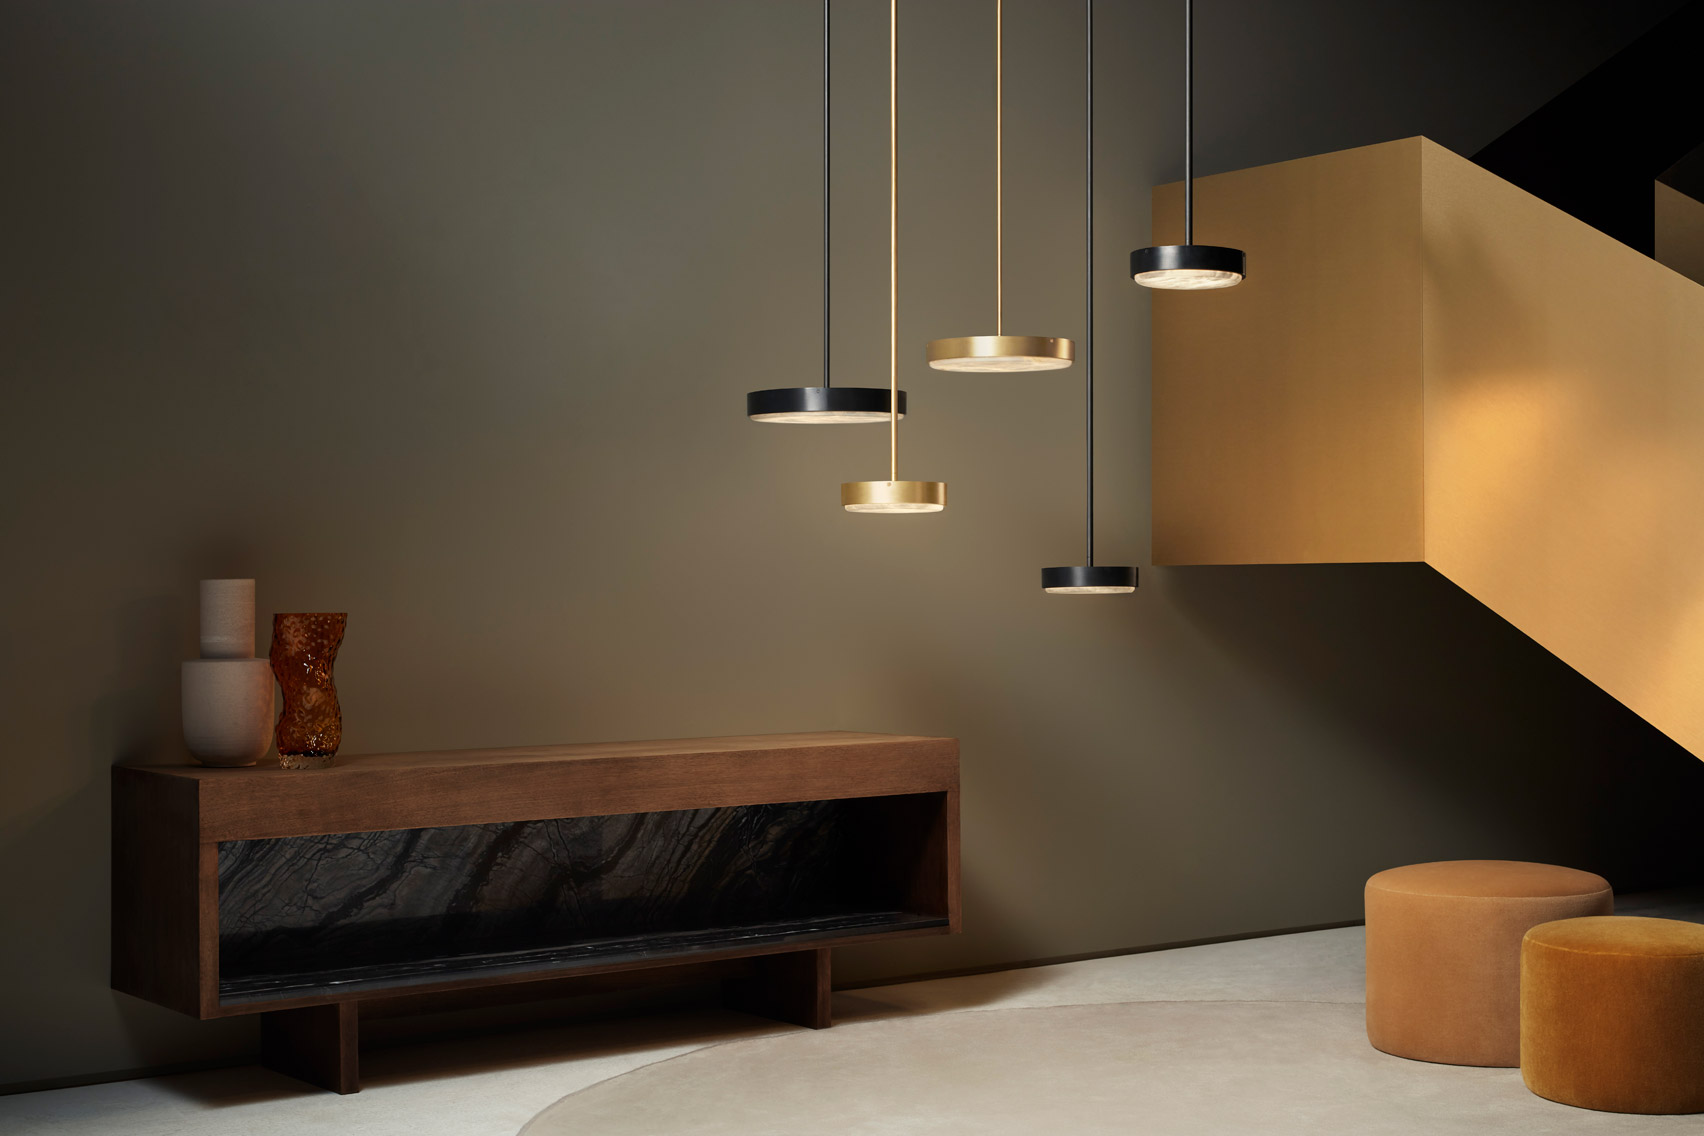 Anvers lighting collection by CTO Lighting